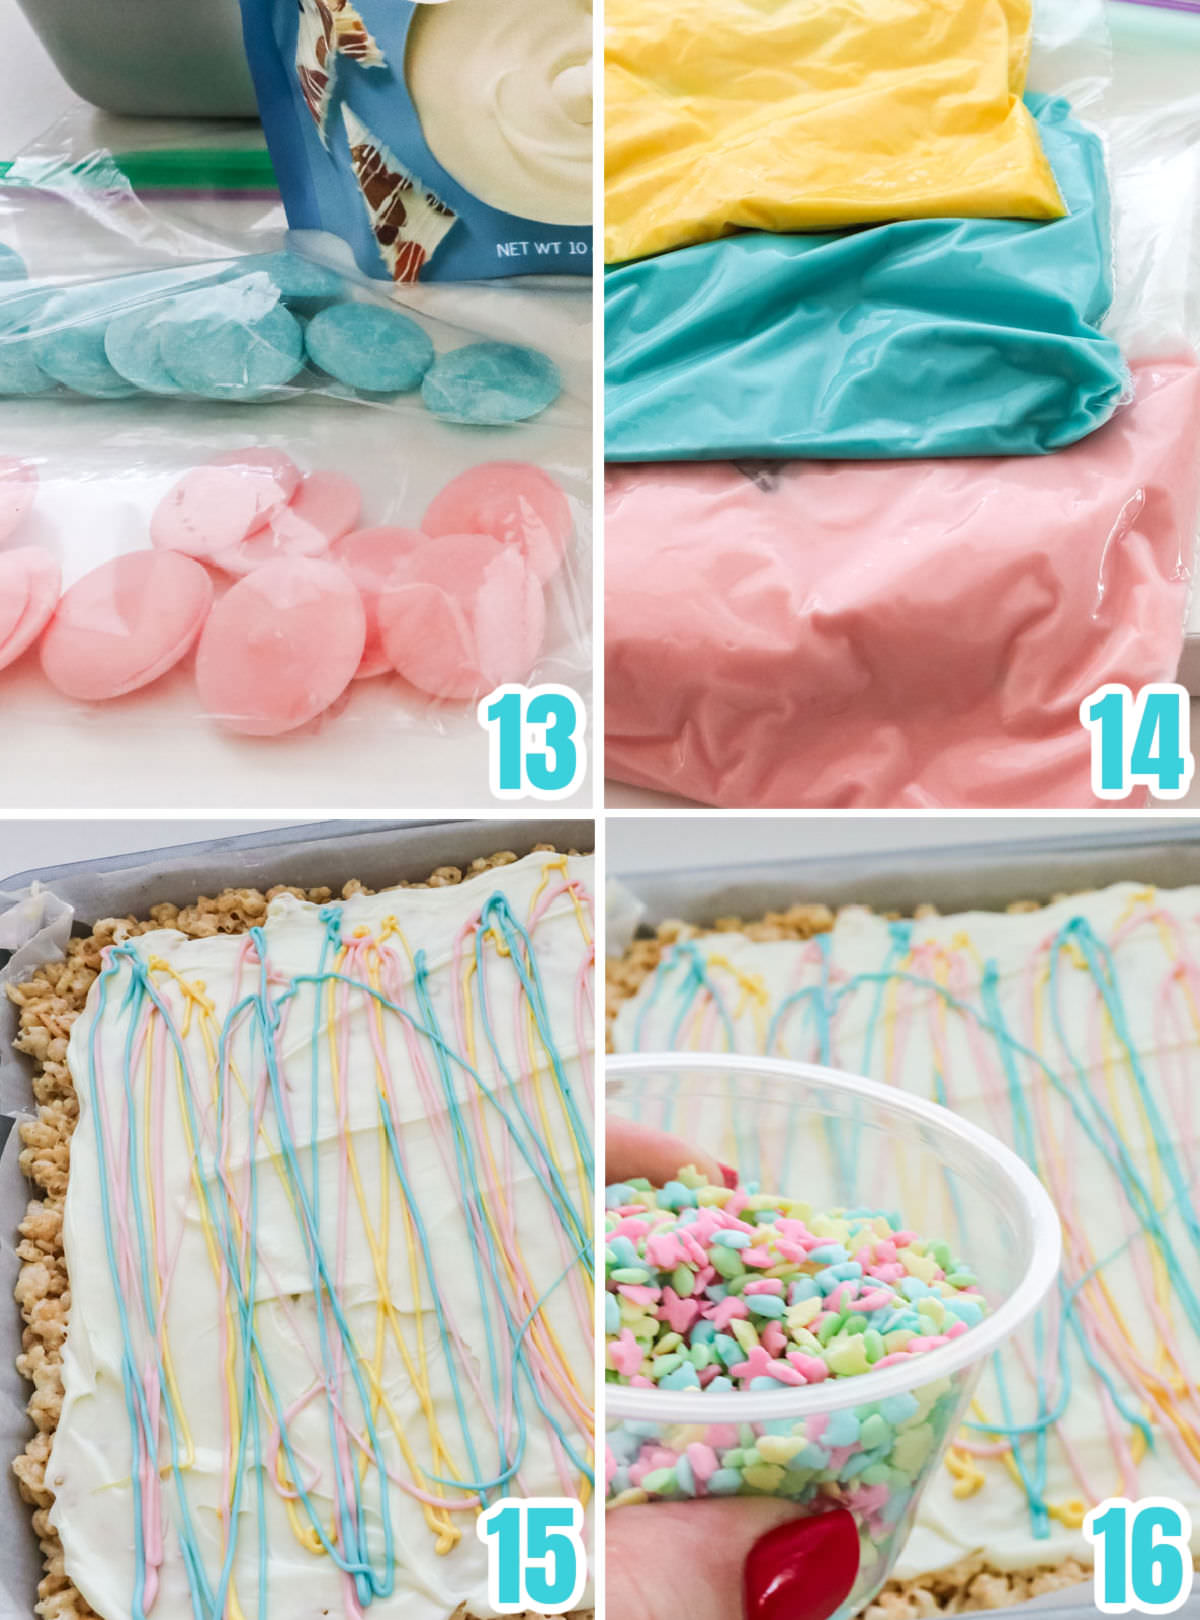 Collage image showing the steps required to decorate the top of the layered dessert bar.